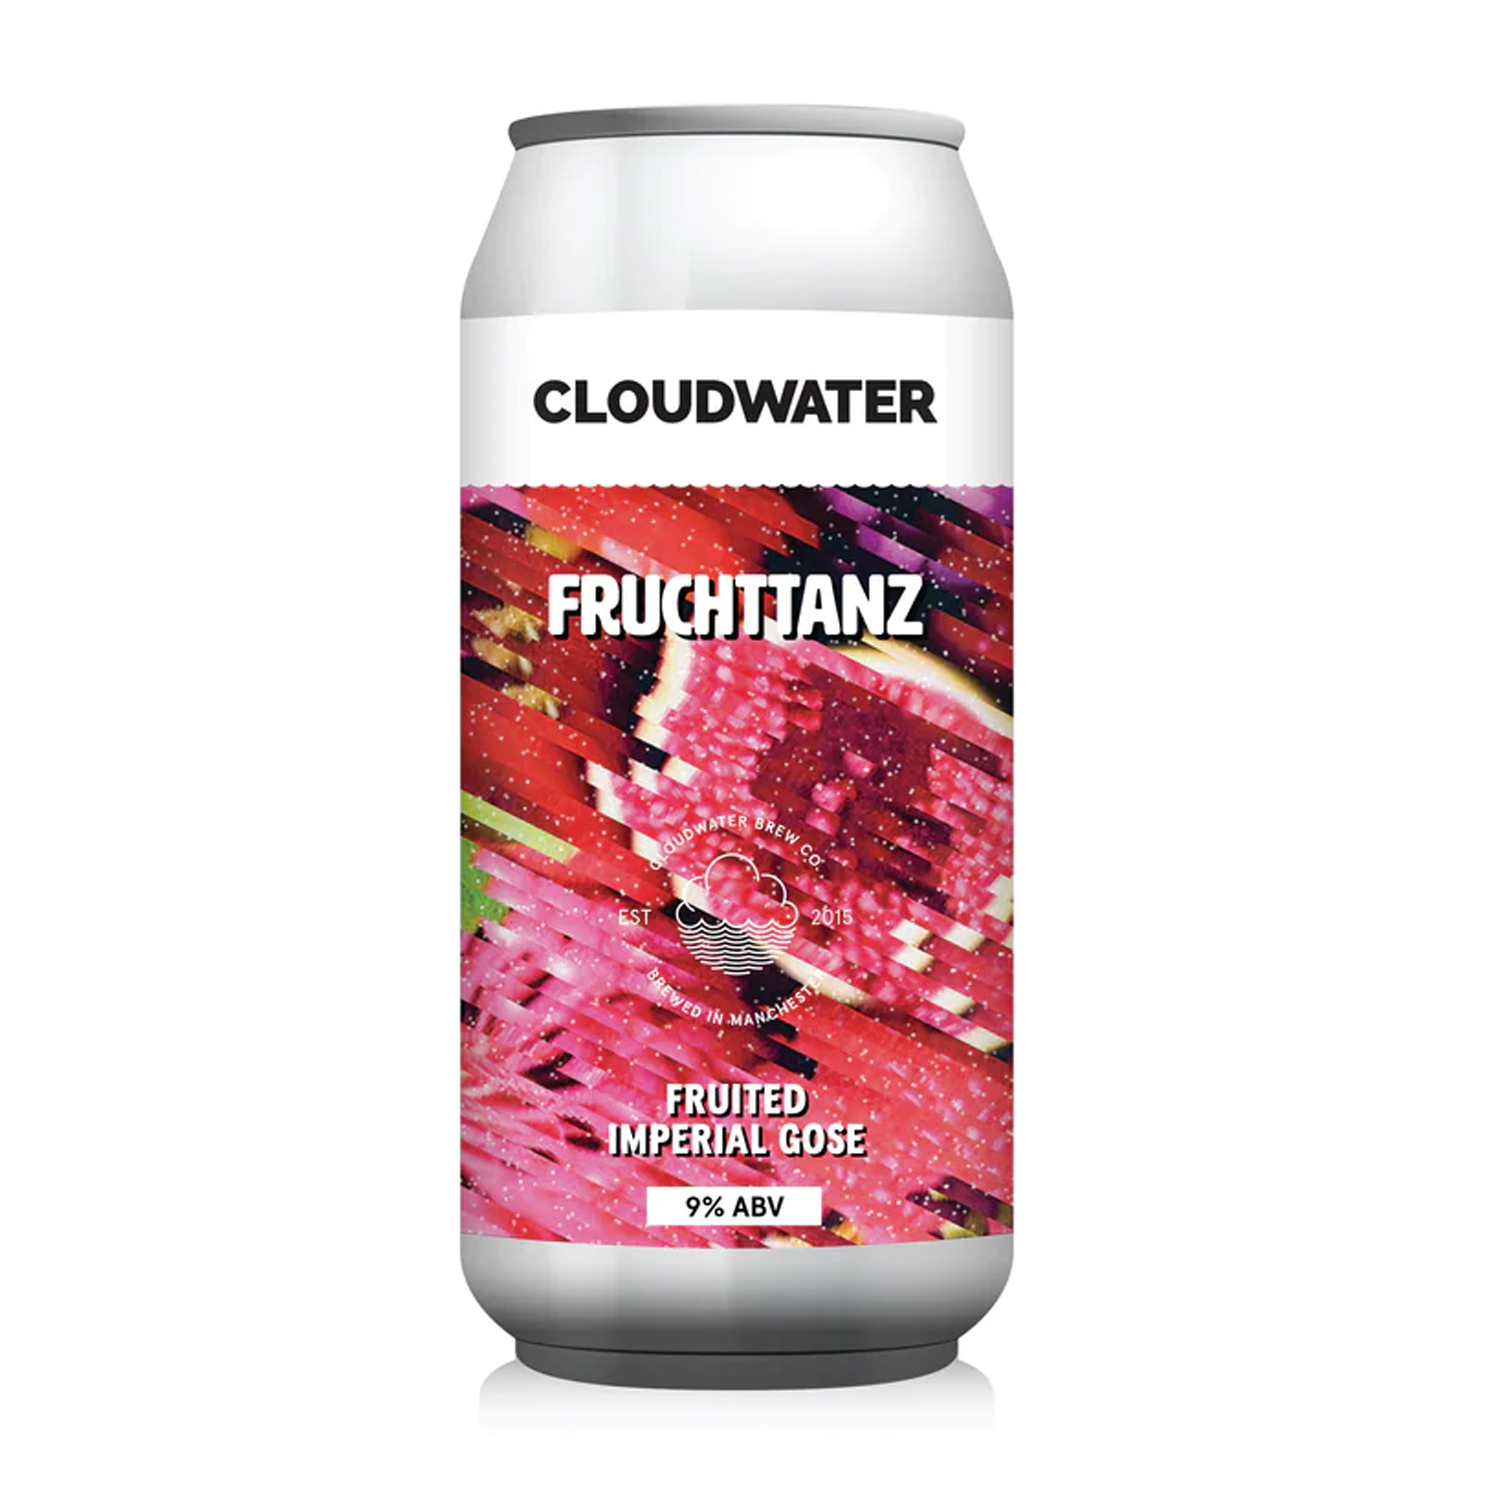 Cloudwater Fruchttanz Fruited Imperial Gose